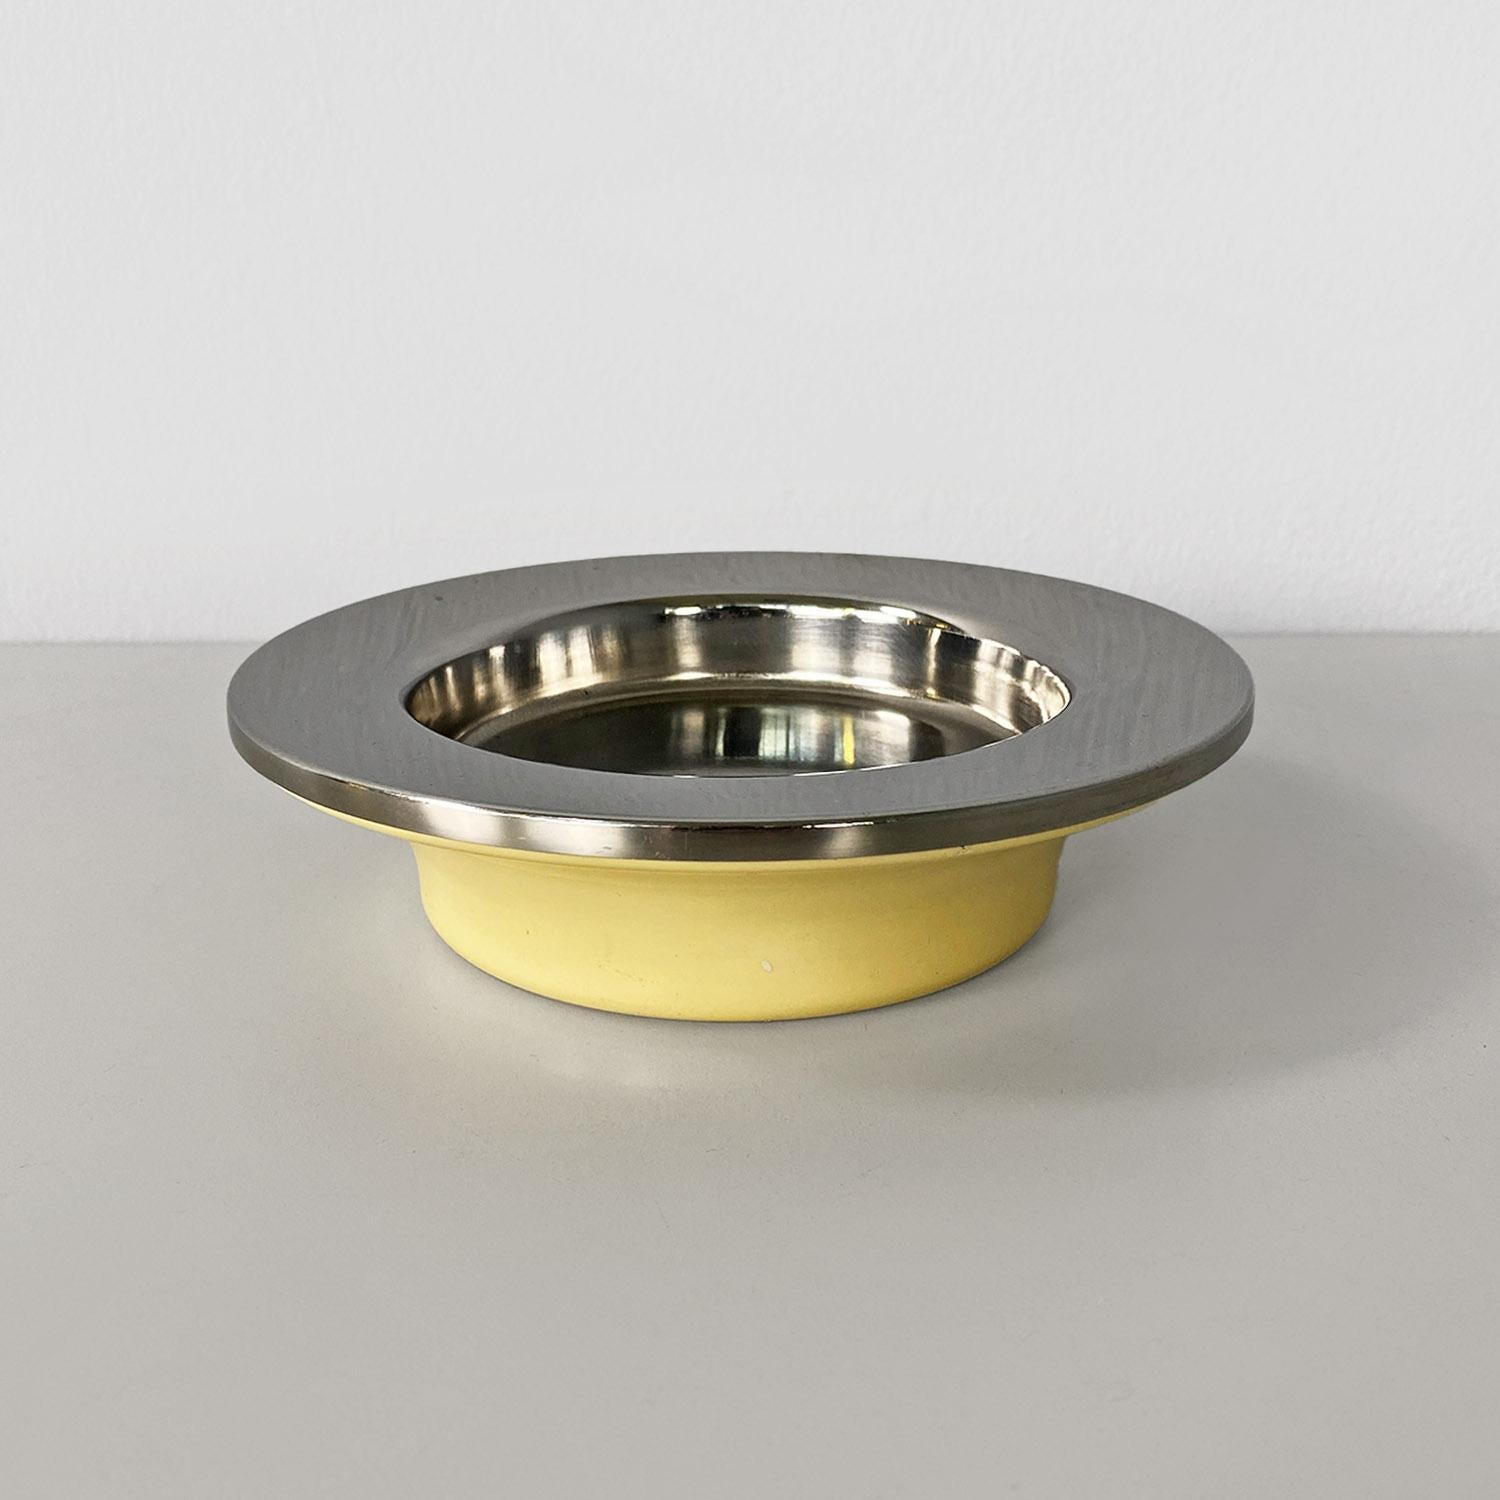 Round-shaped ashtray with chrome-plated metal plate for collecting butts and with overhanging profile and beige plastic outer container. Can also be used as an empty-pocket plate.
Produced by Kartell c. 1970 and designed by Gino Colombini.